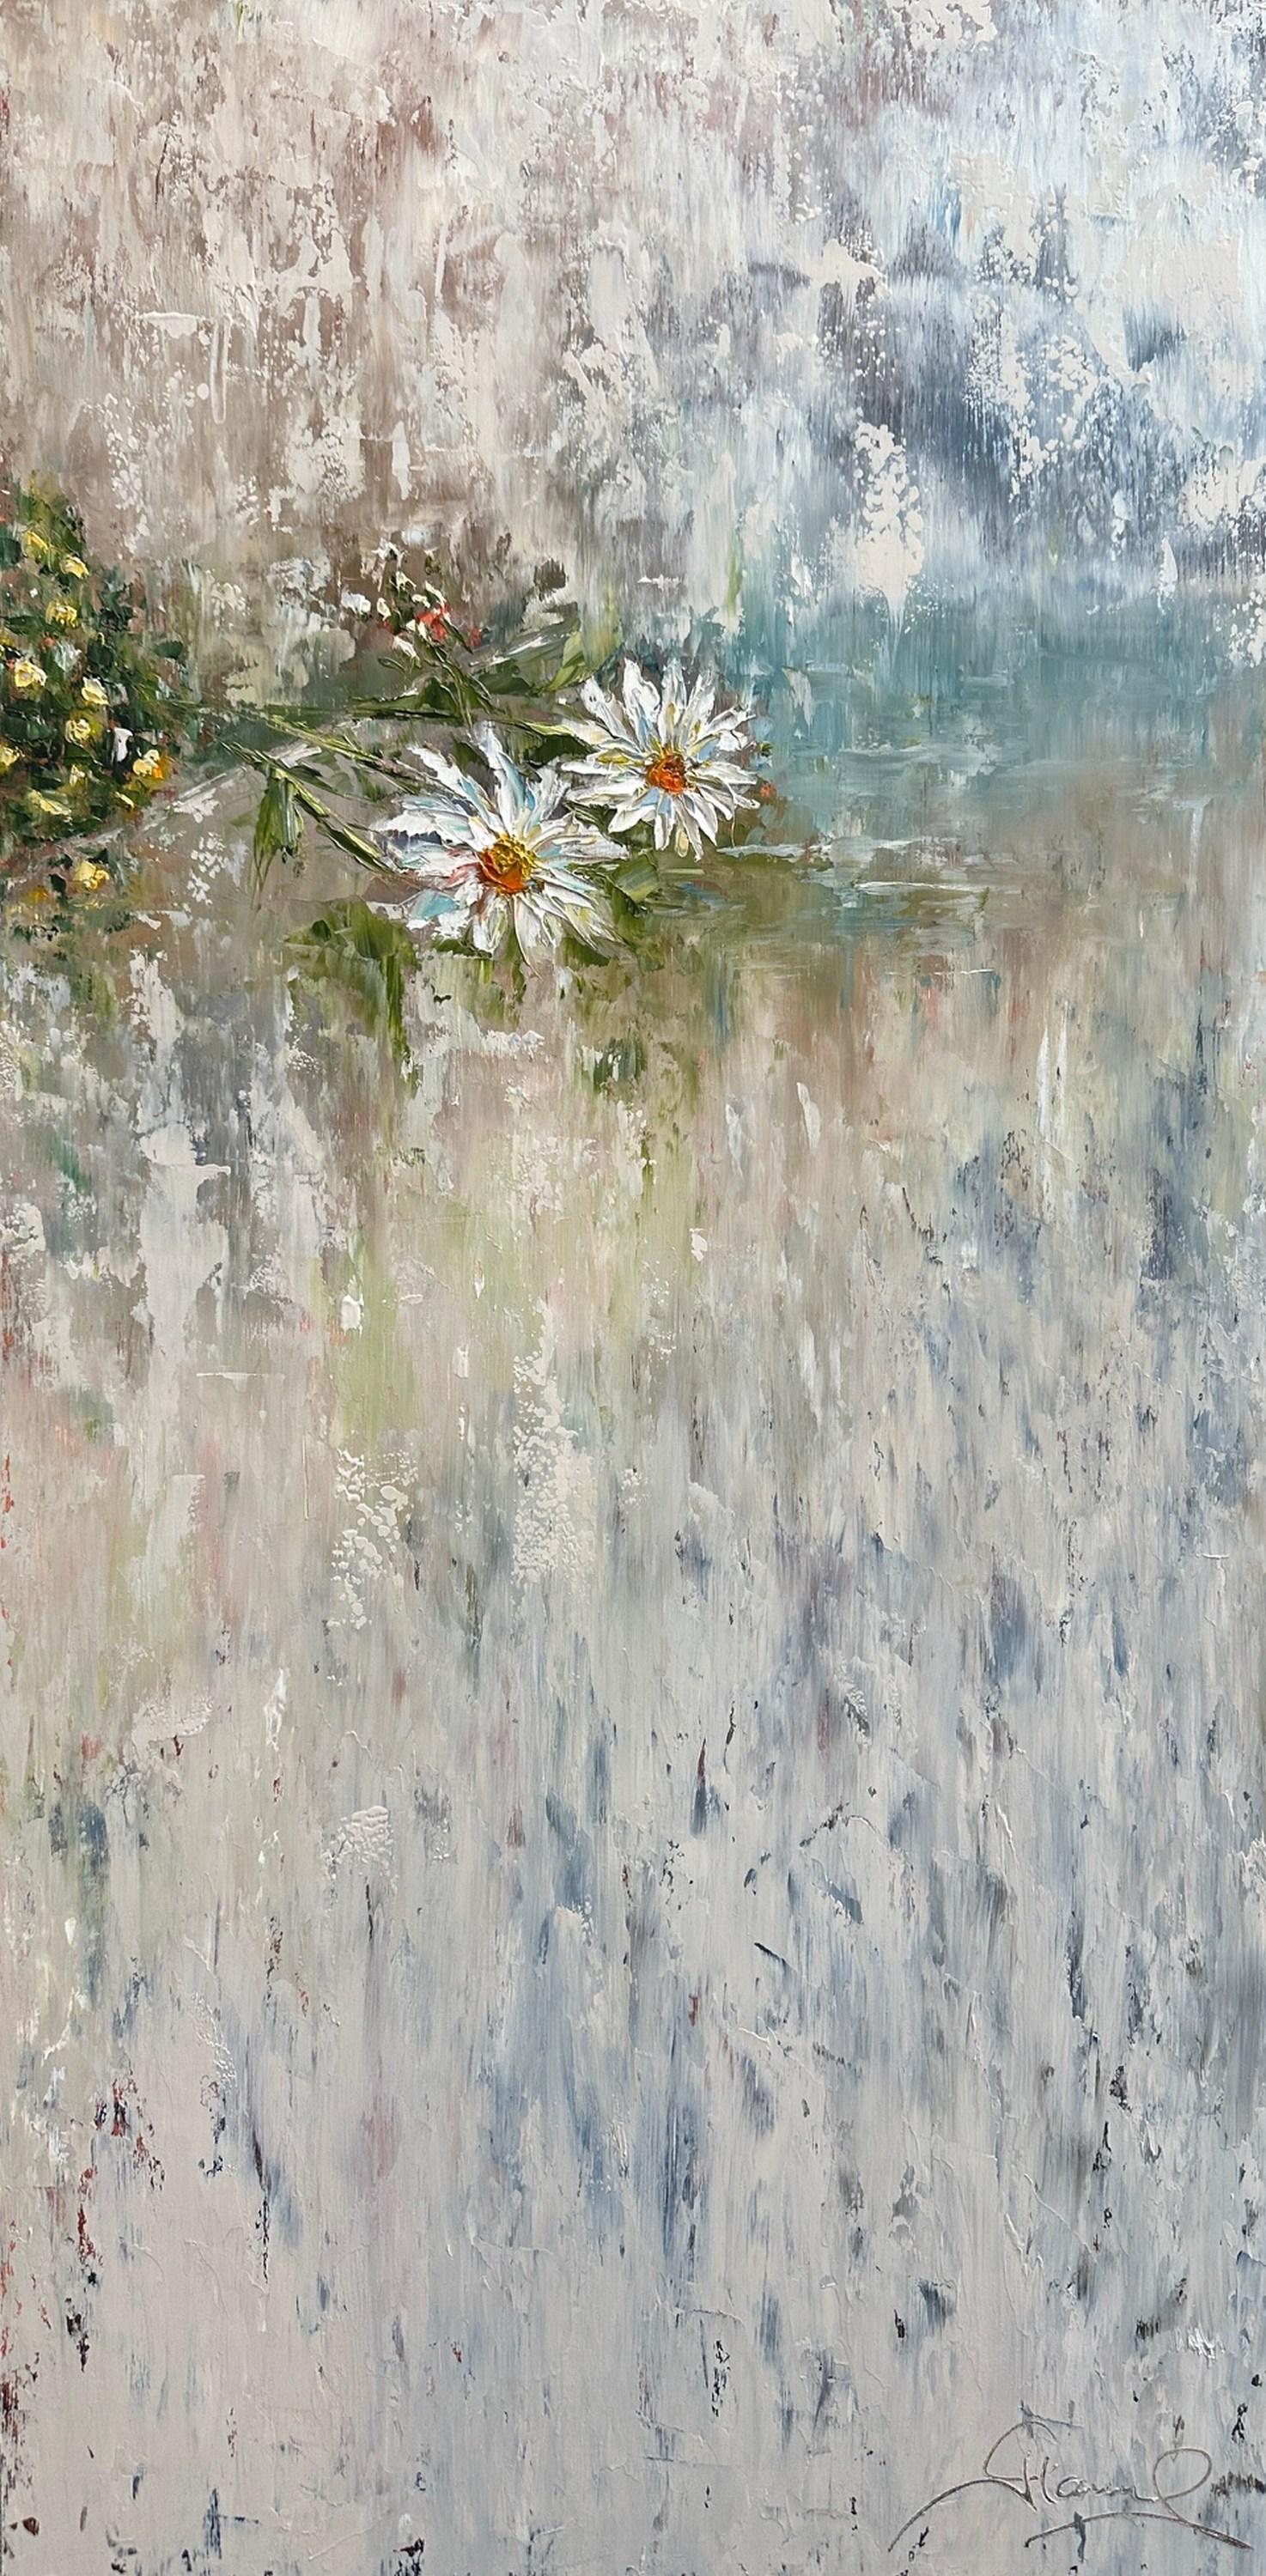 Genevieve Hamel
Soft & Fluffy
Oil on Wood Panel
Year: 2024
Size: 36 x 18 x 1.625 inches
Signed by hand
COA provided
Ref.: 924802-2096

Soft & fluffy are the perfect words to describe these fragile daisies resting on a table. The heavy glazing’s add